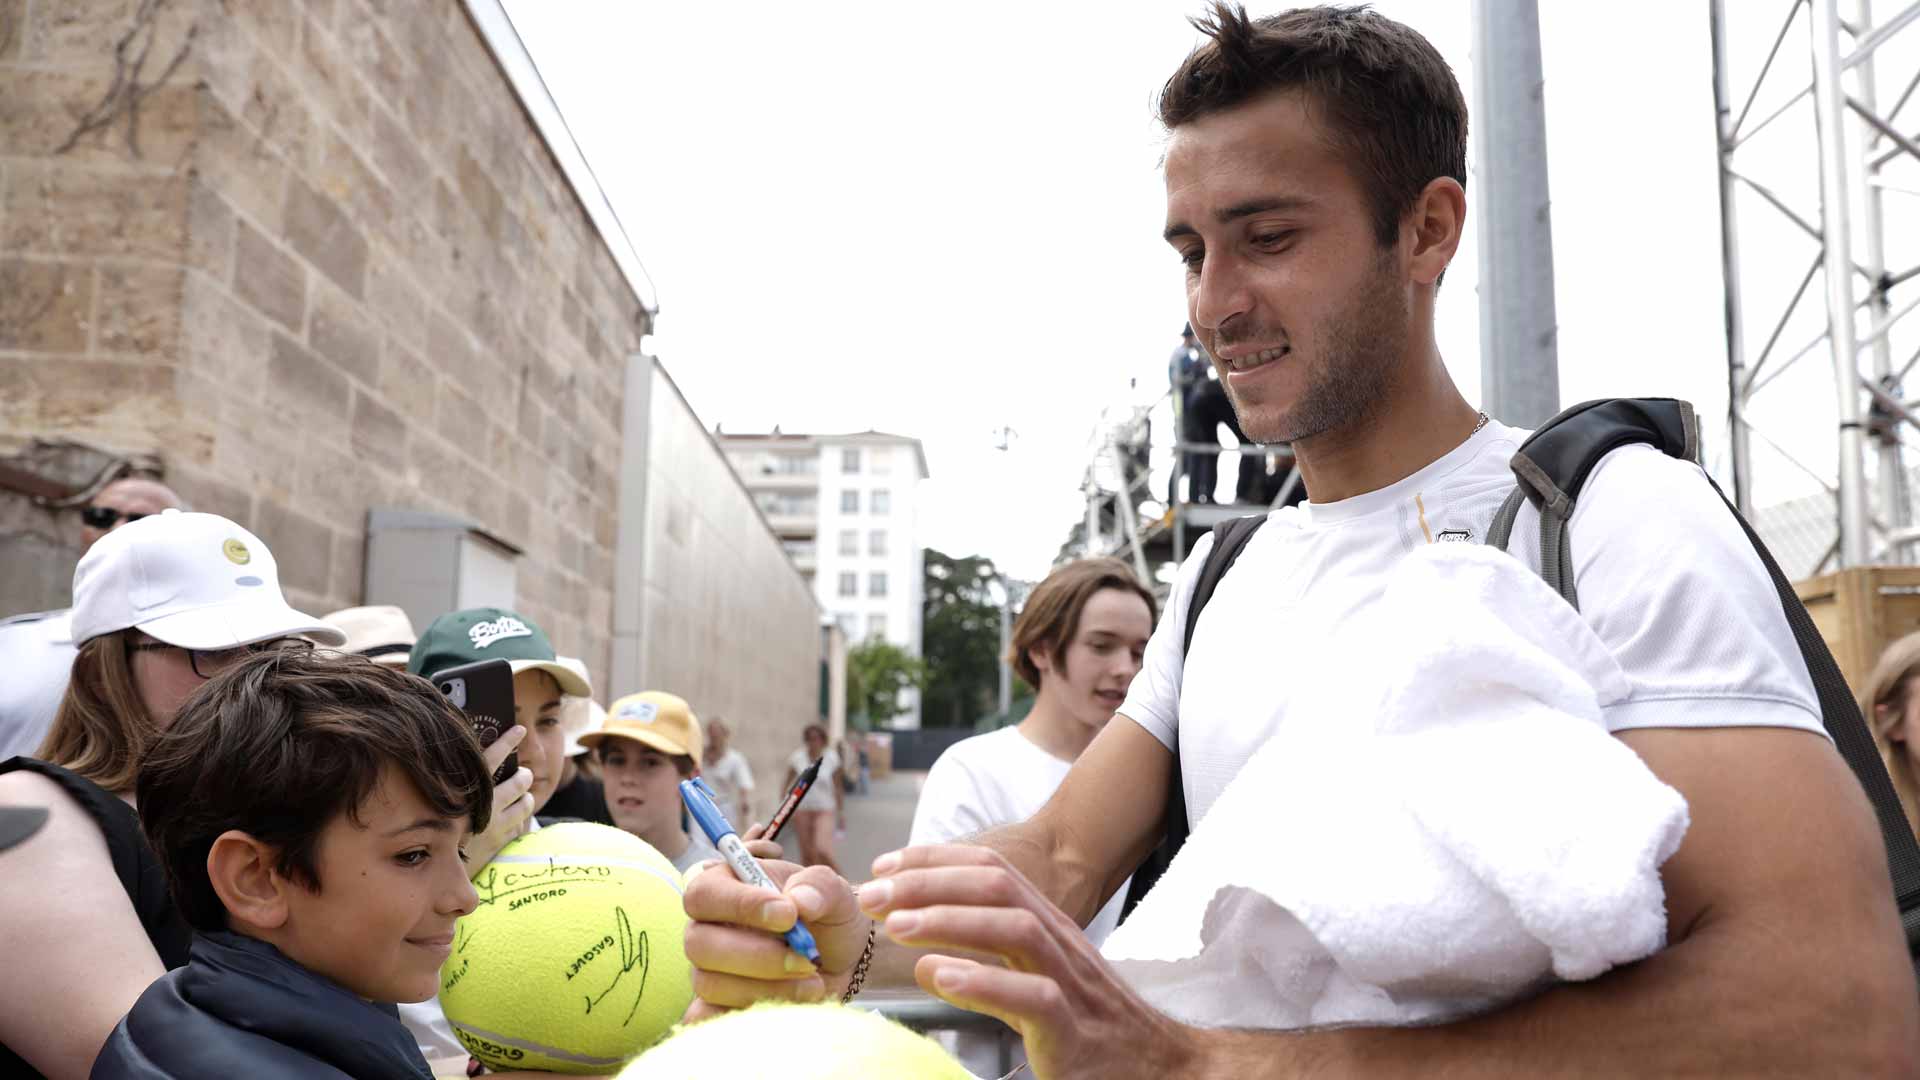 Tomas Martin Etcheverry signs autographs following a semi-final win in Bordeaux.